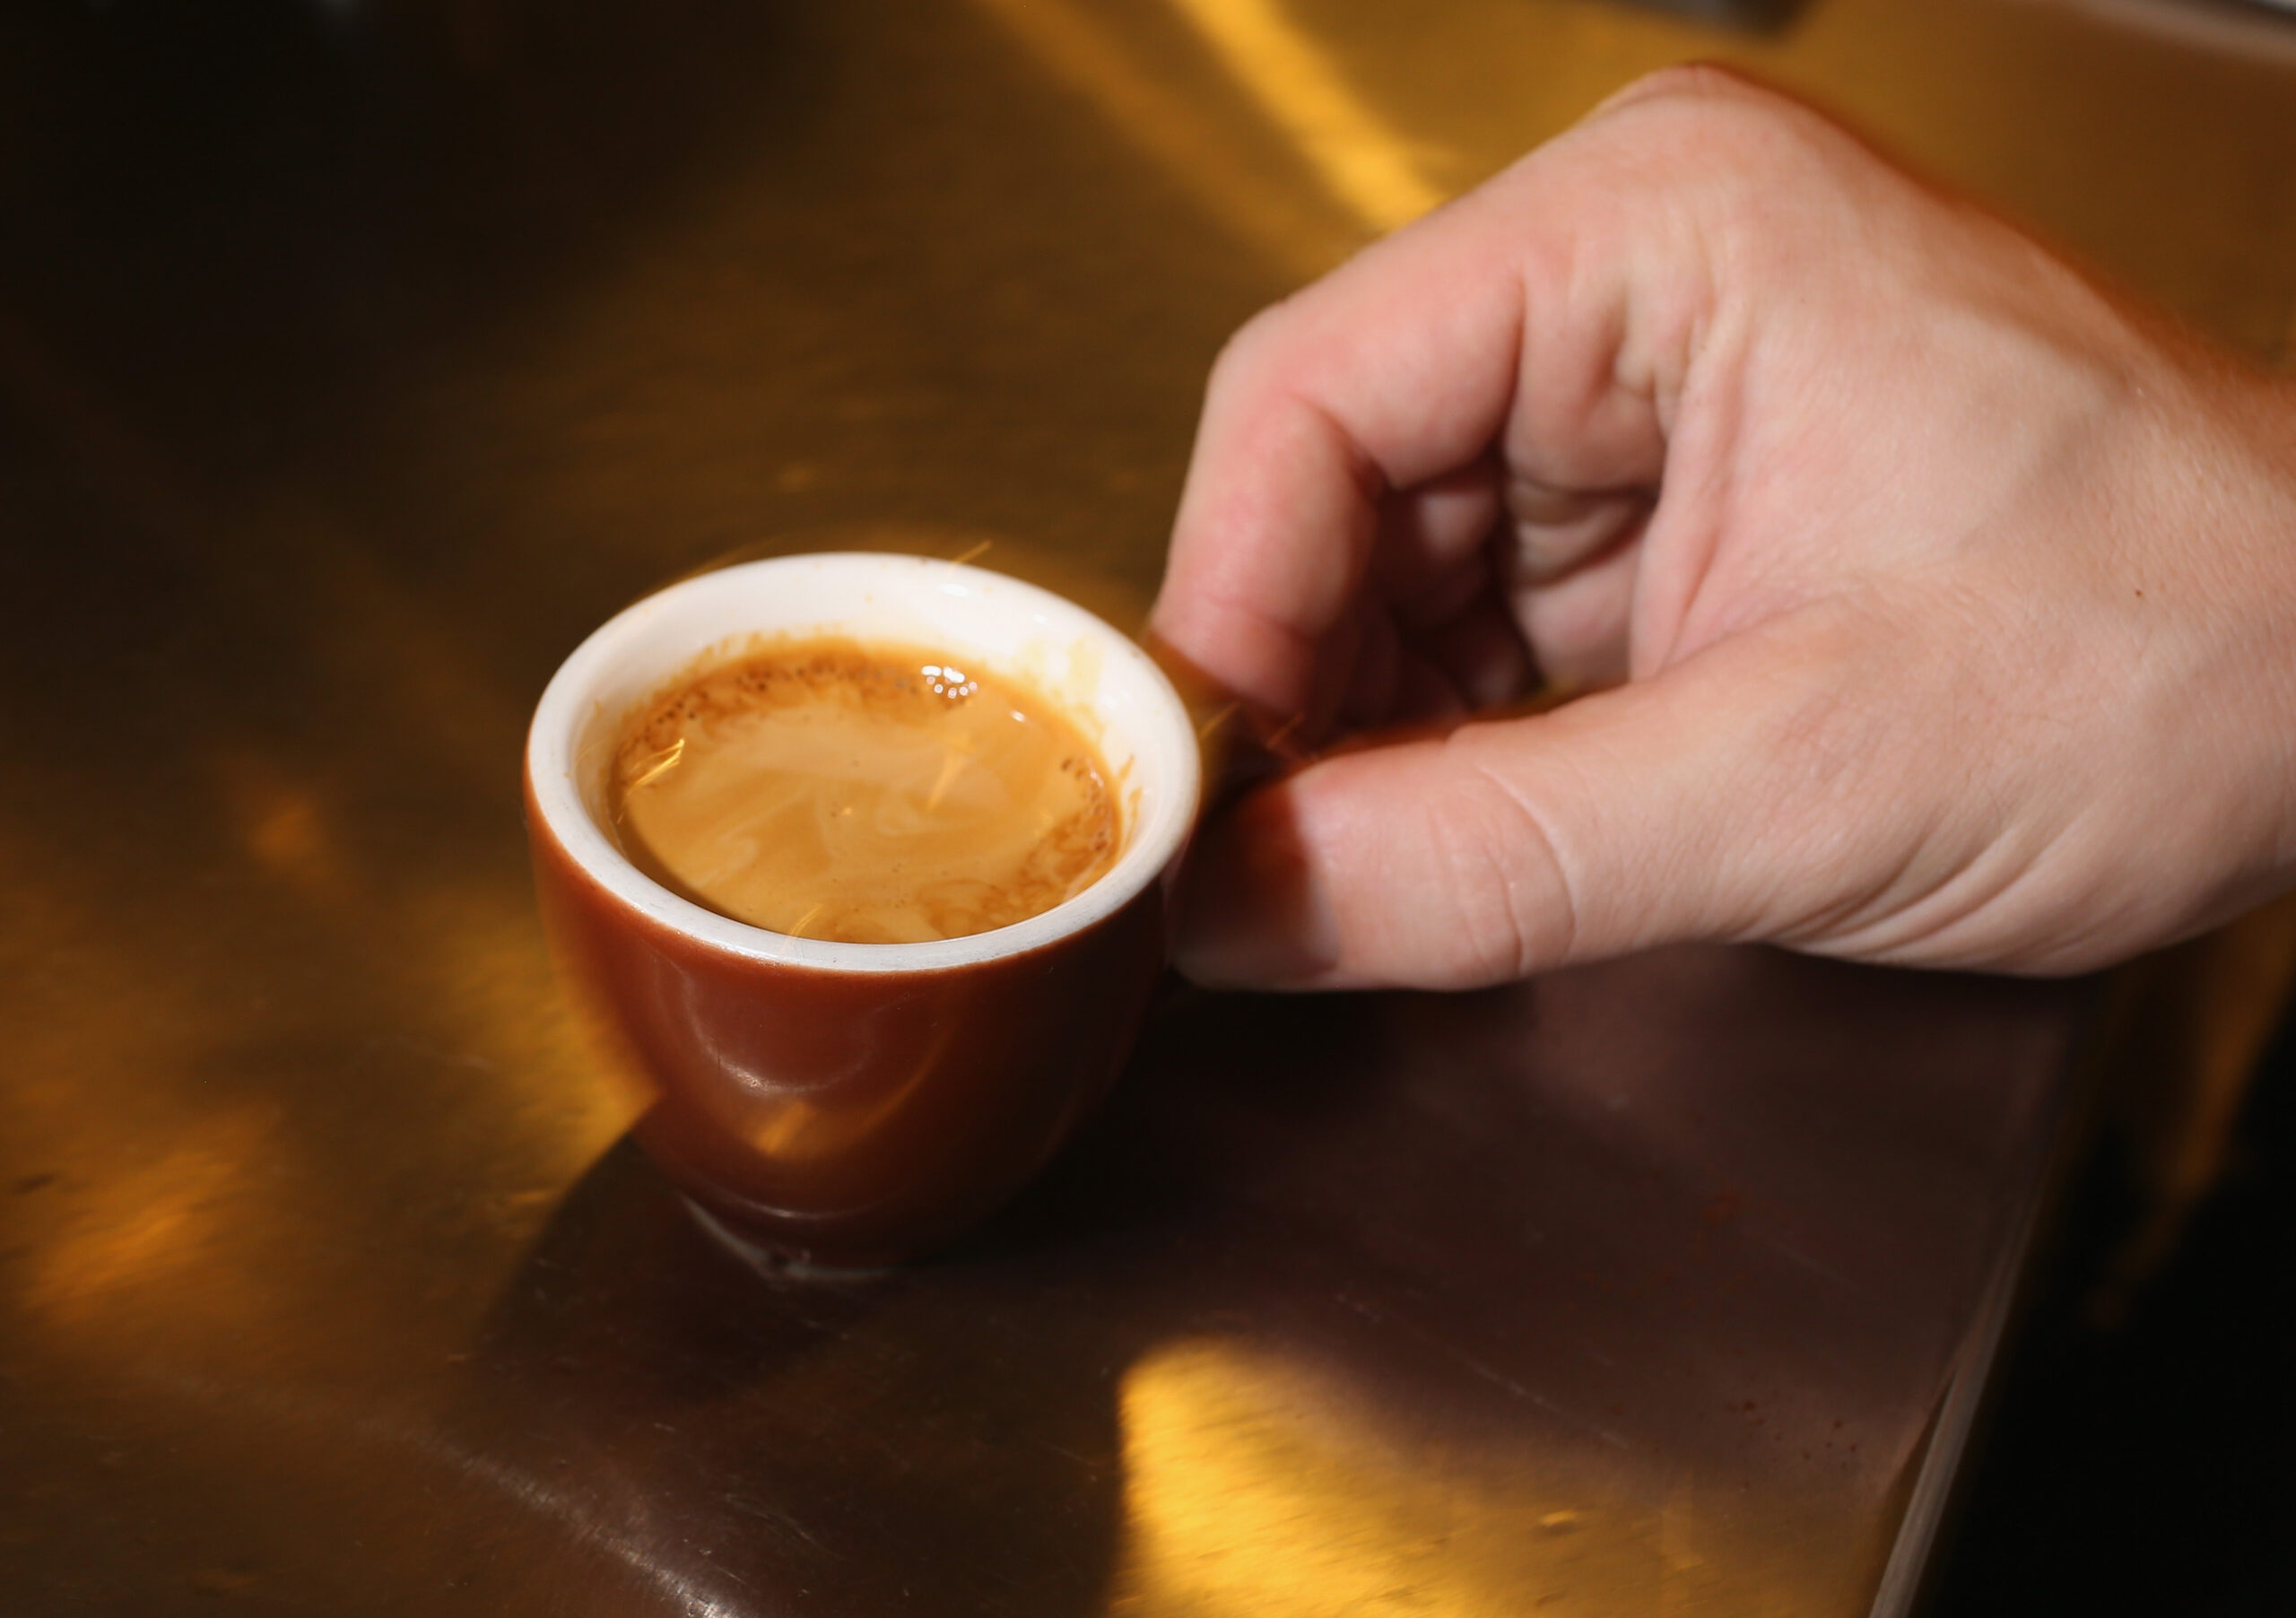 How much caffeine is in a 5 shot of espresso at Starbucks?